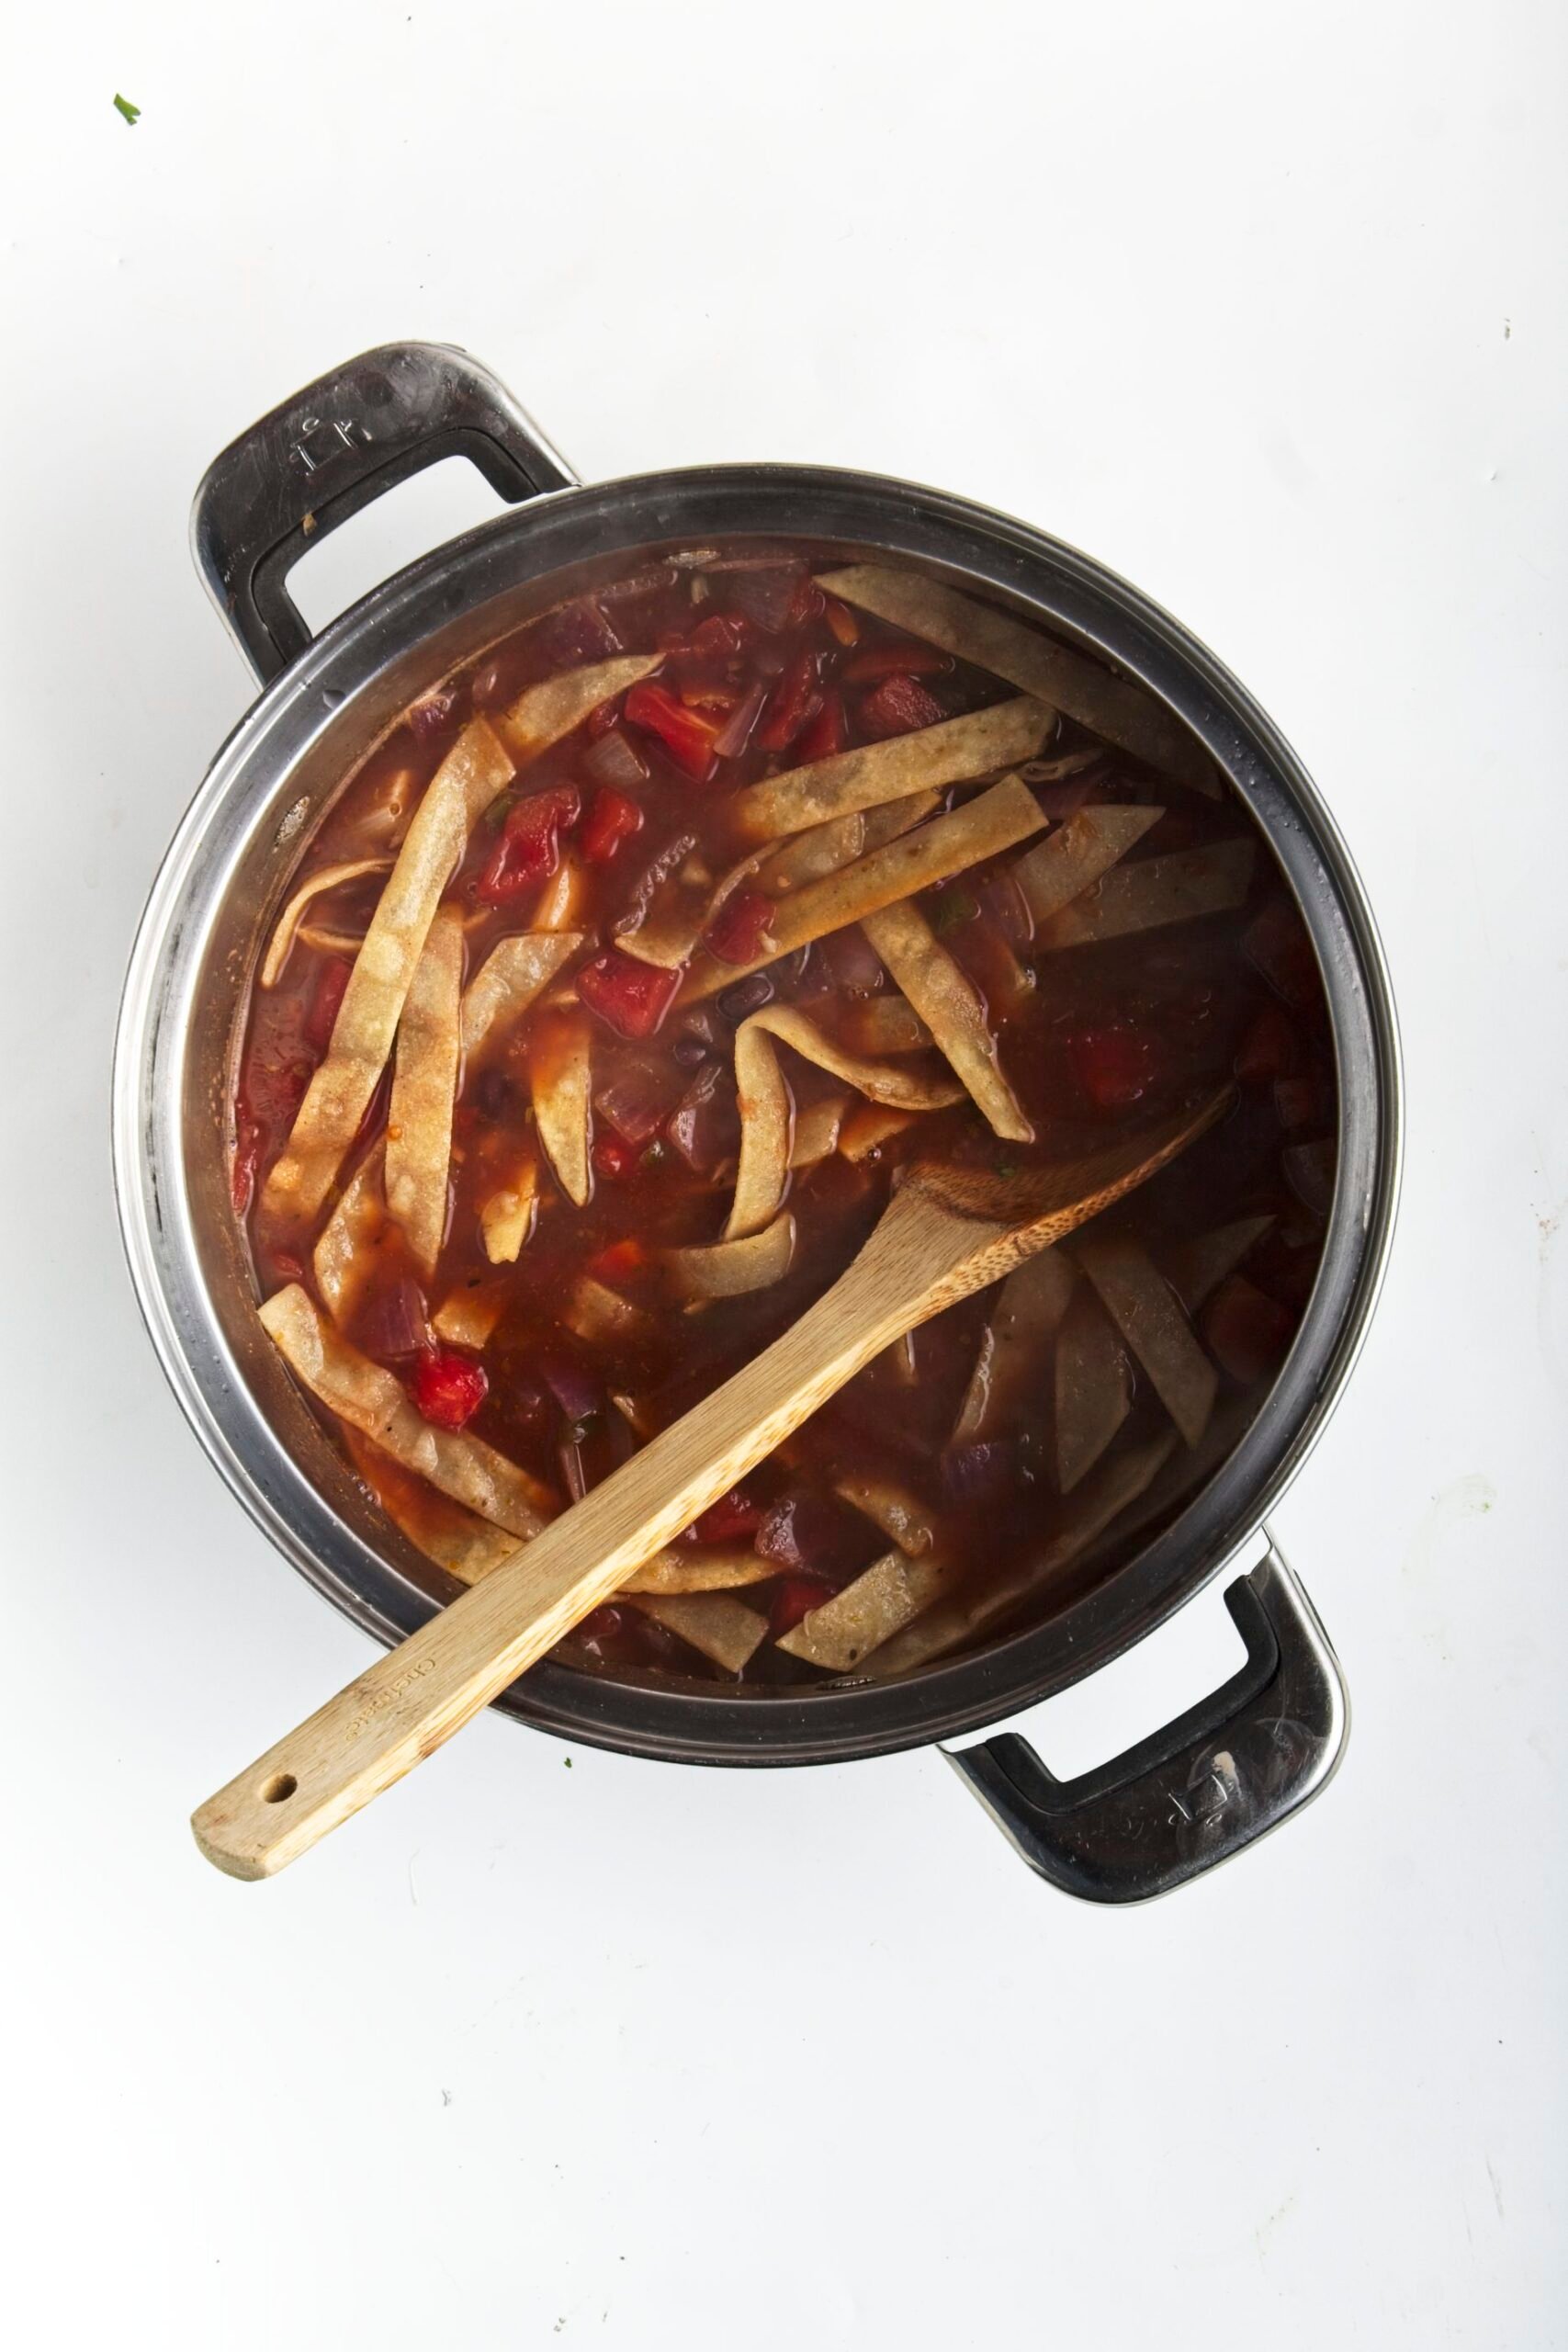 A soup pot cooking tortilla soup with a wooden spoon and crispy tortilla strips